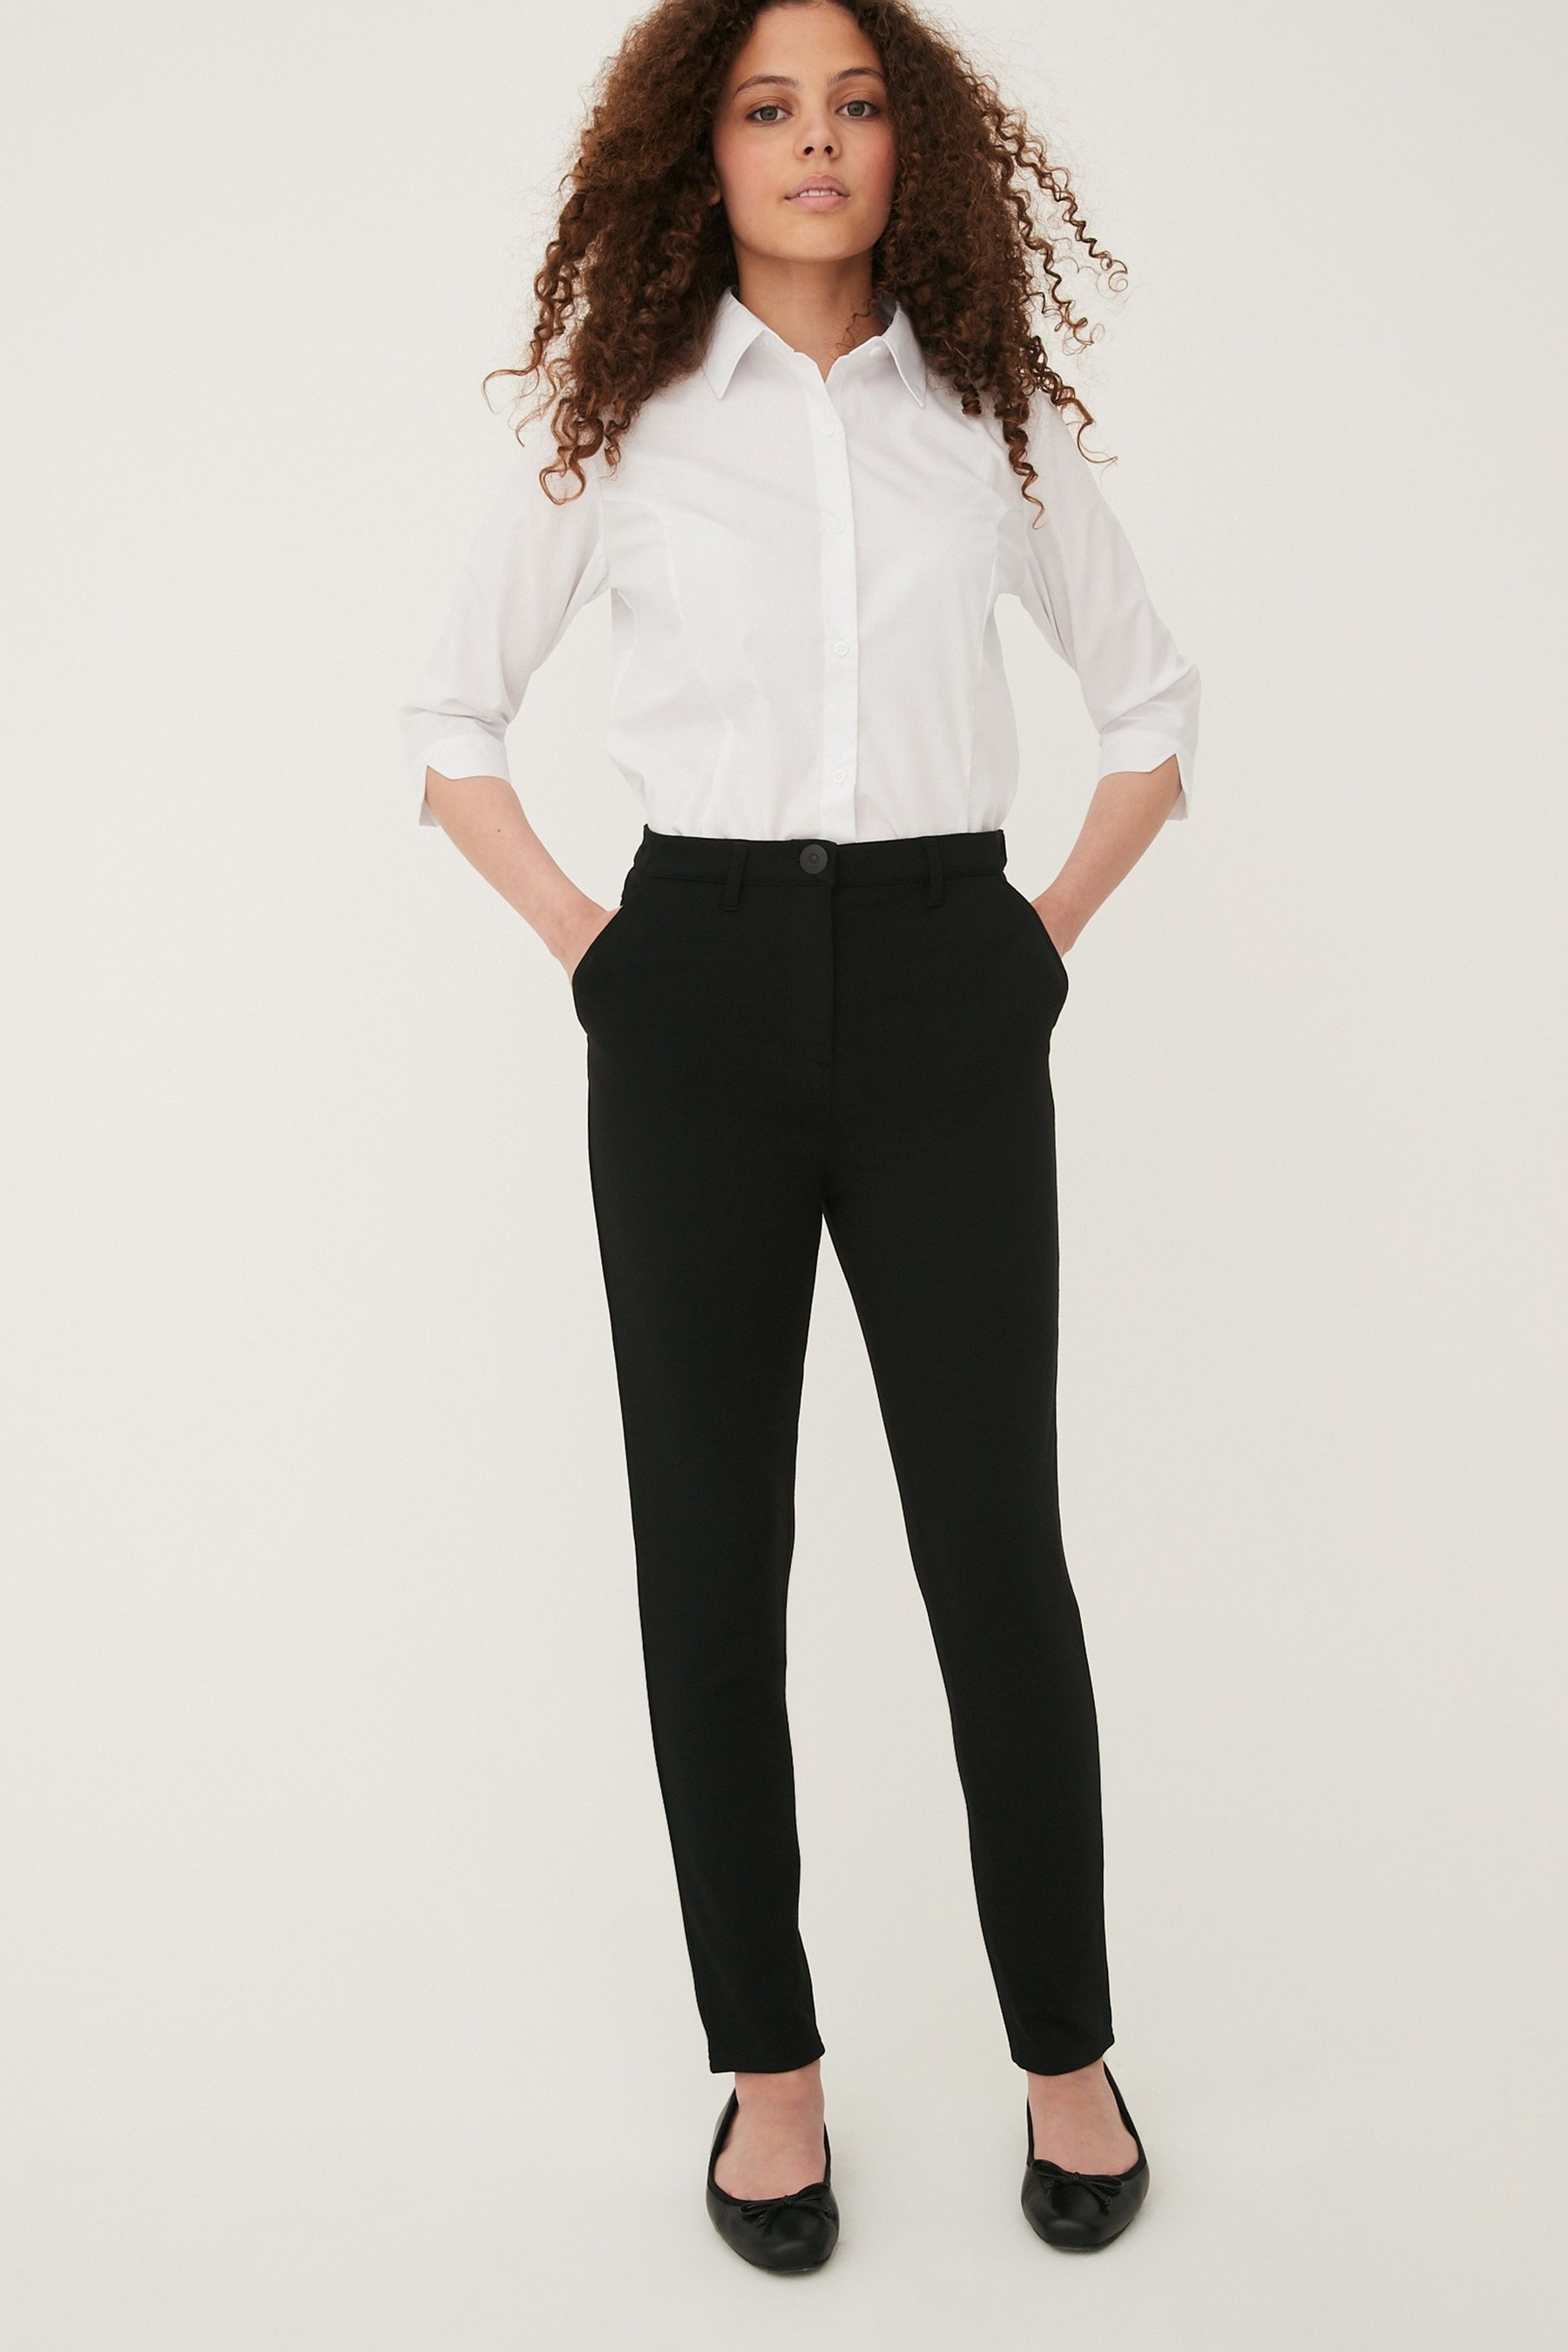 Buy Black Senior High Waist Stretch School Trousers (9-18yrs) from the ...